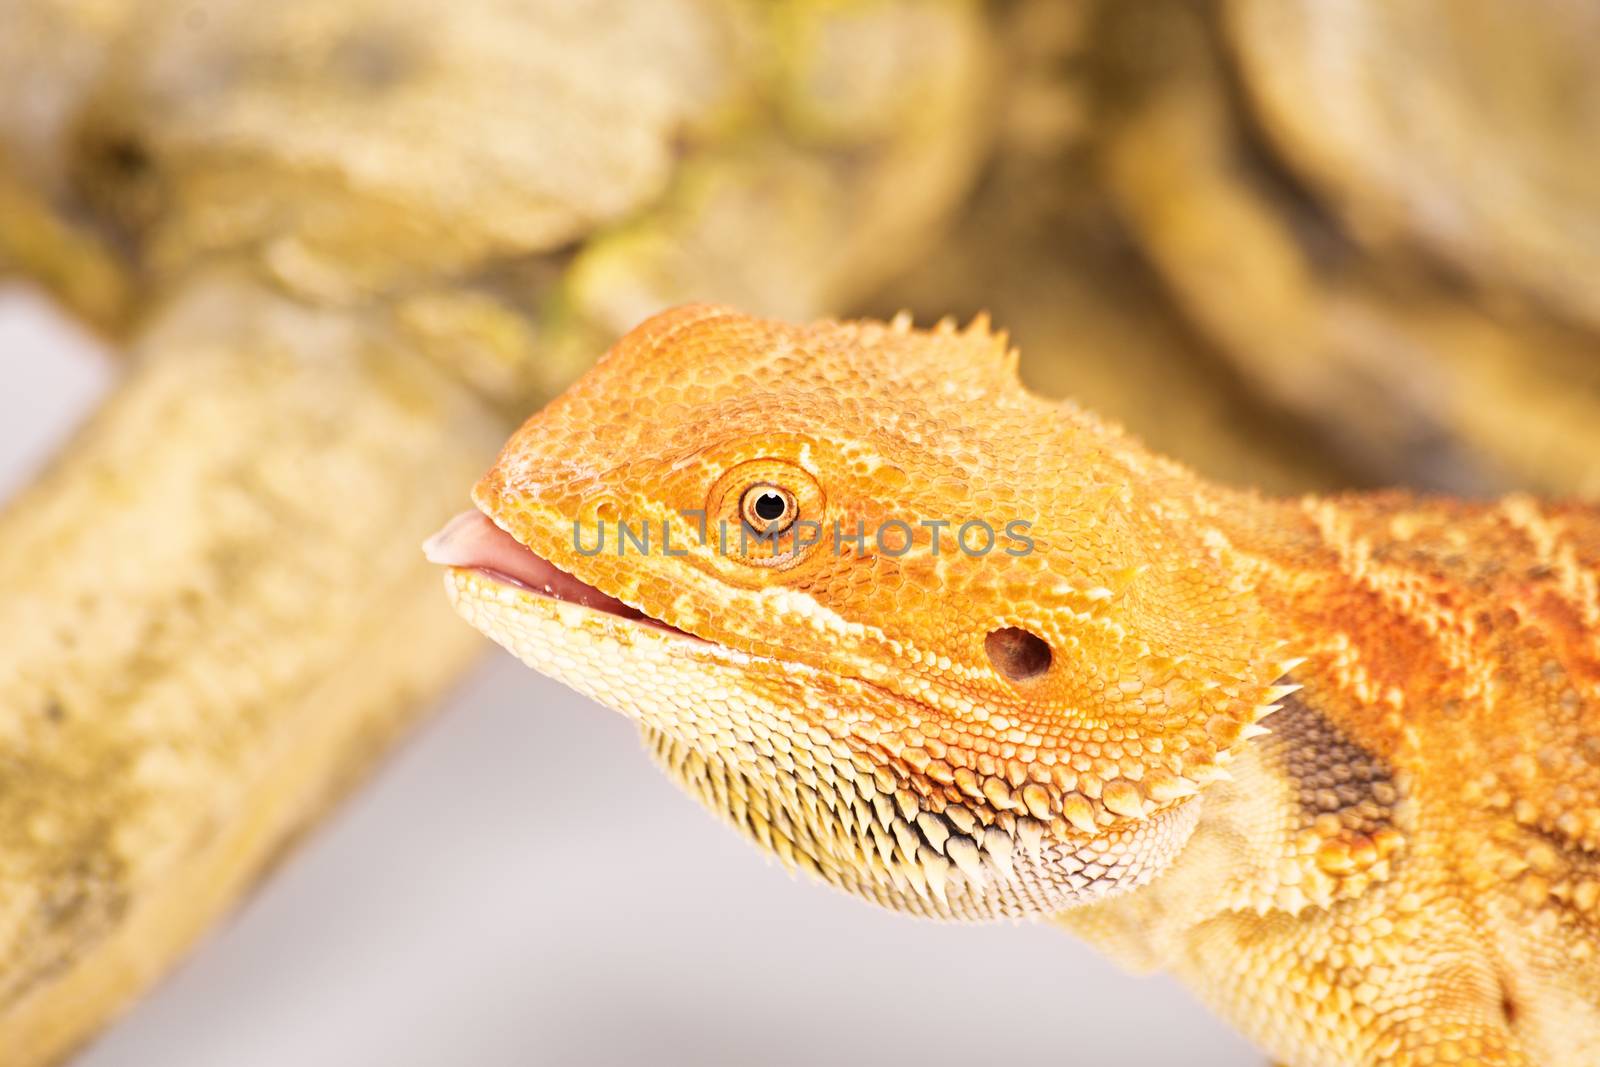 Bearded dragon with tongue out by Mendelex